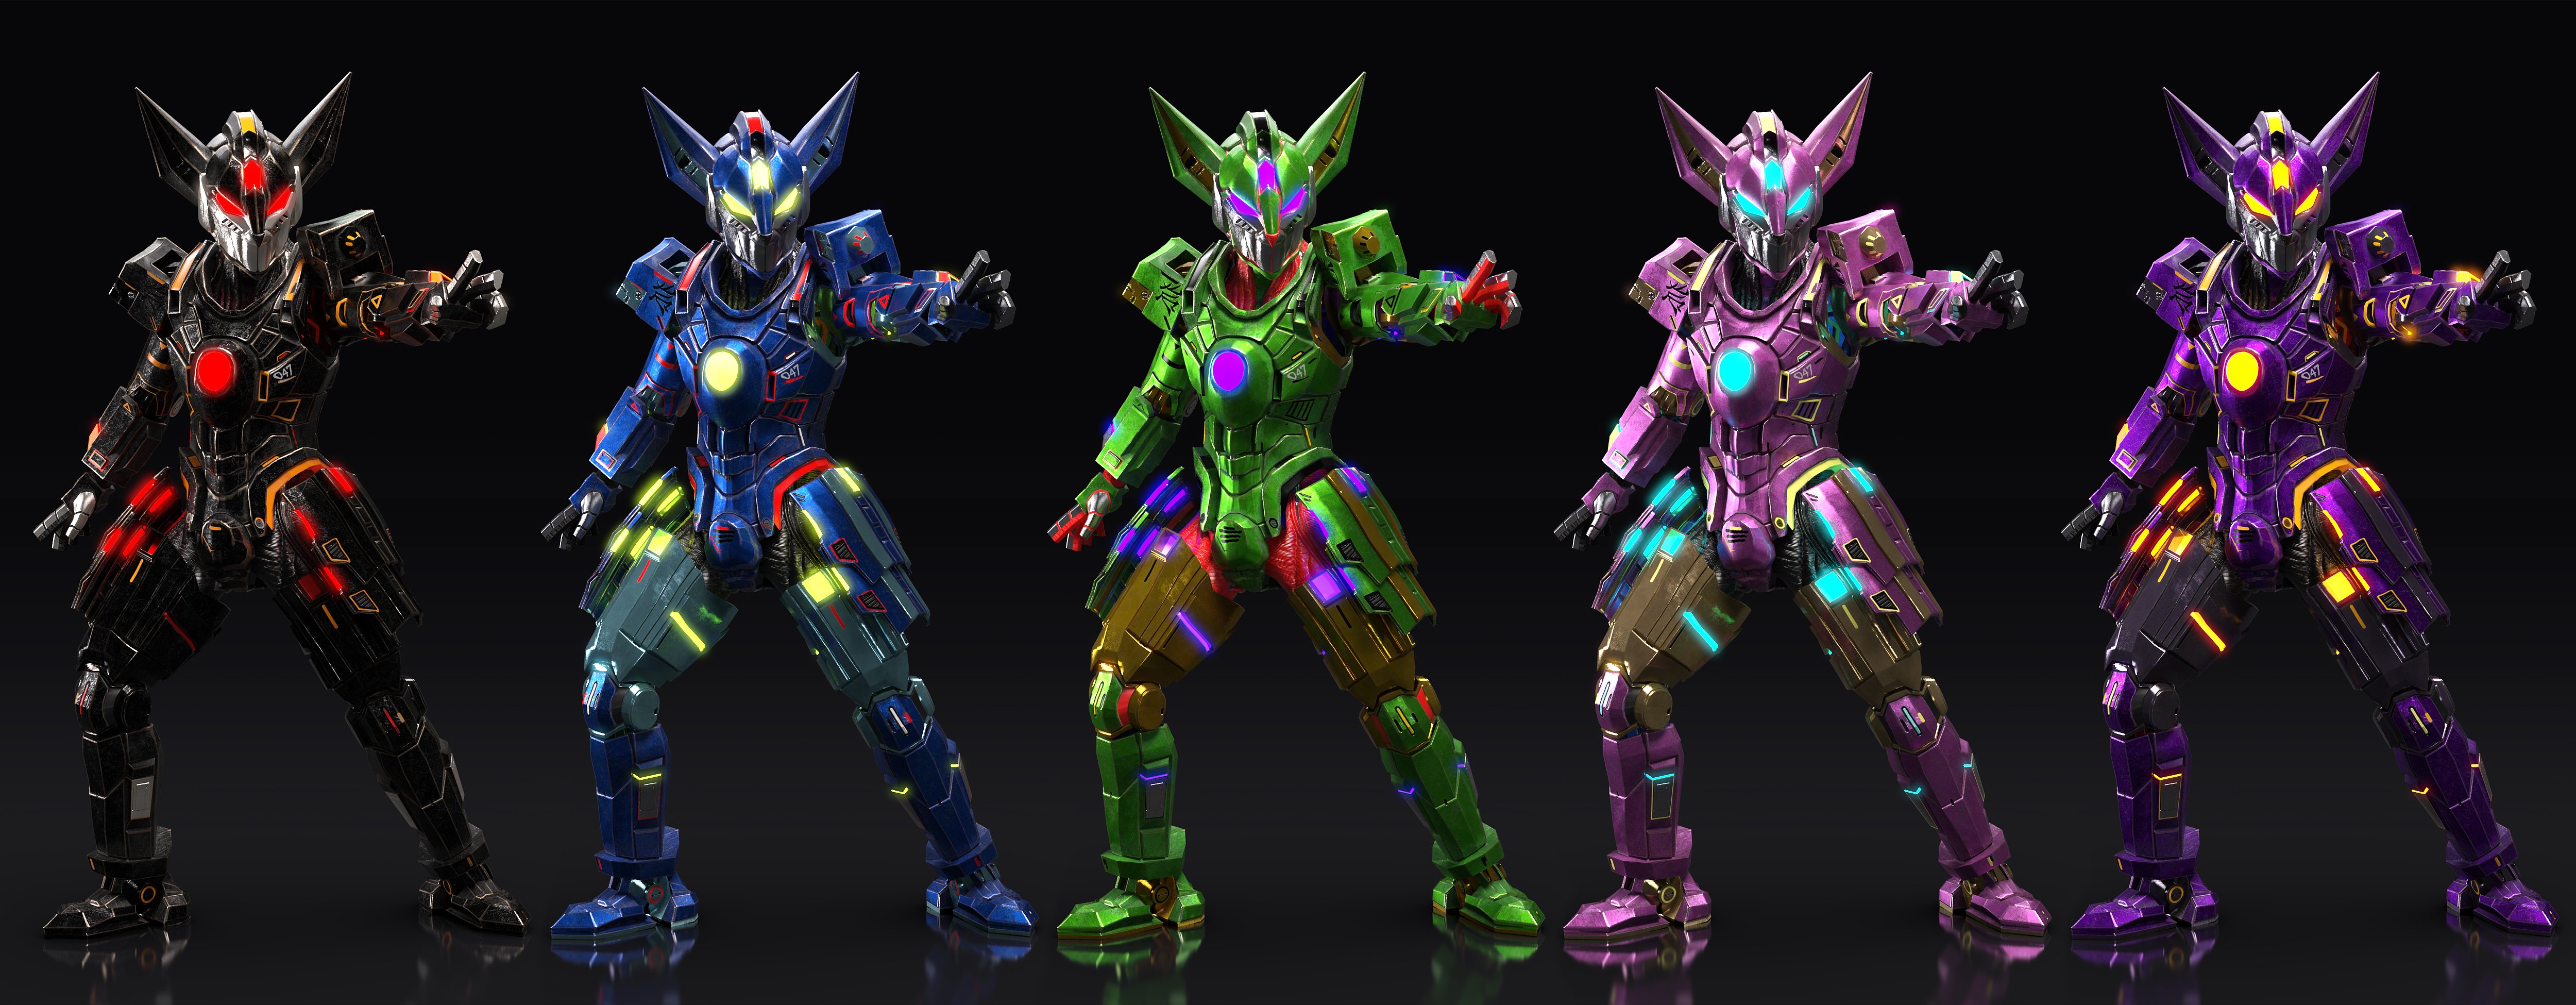 Kitsune Mech Armor for Genesis 8 and 8.1 Males by: Trickster3DX, 3D Models by Daz 3D